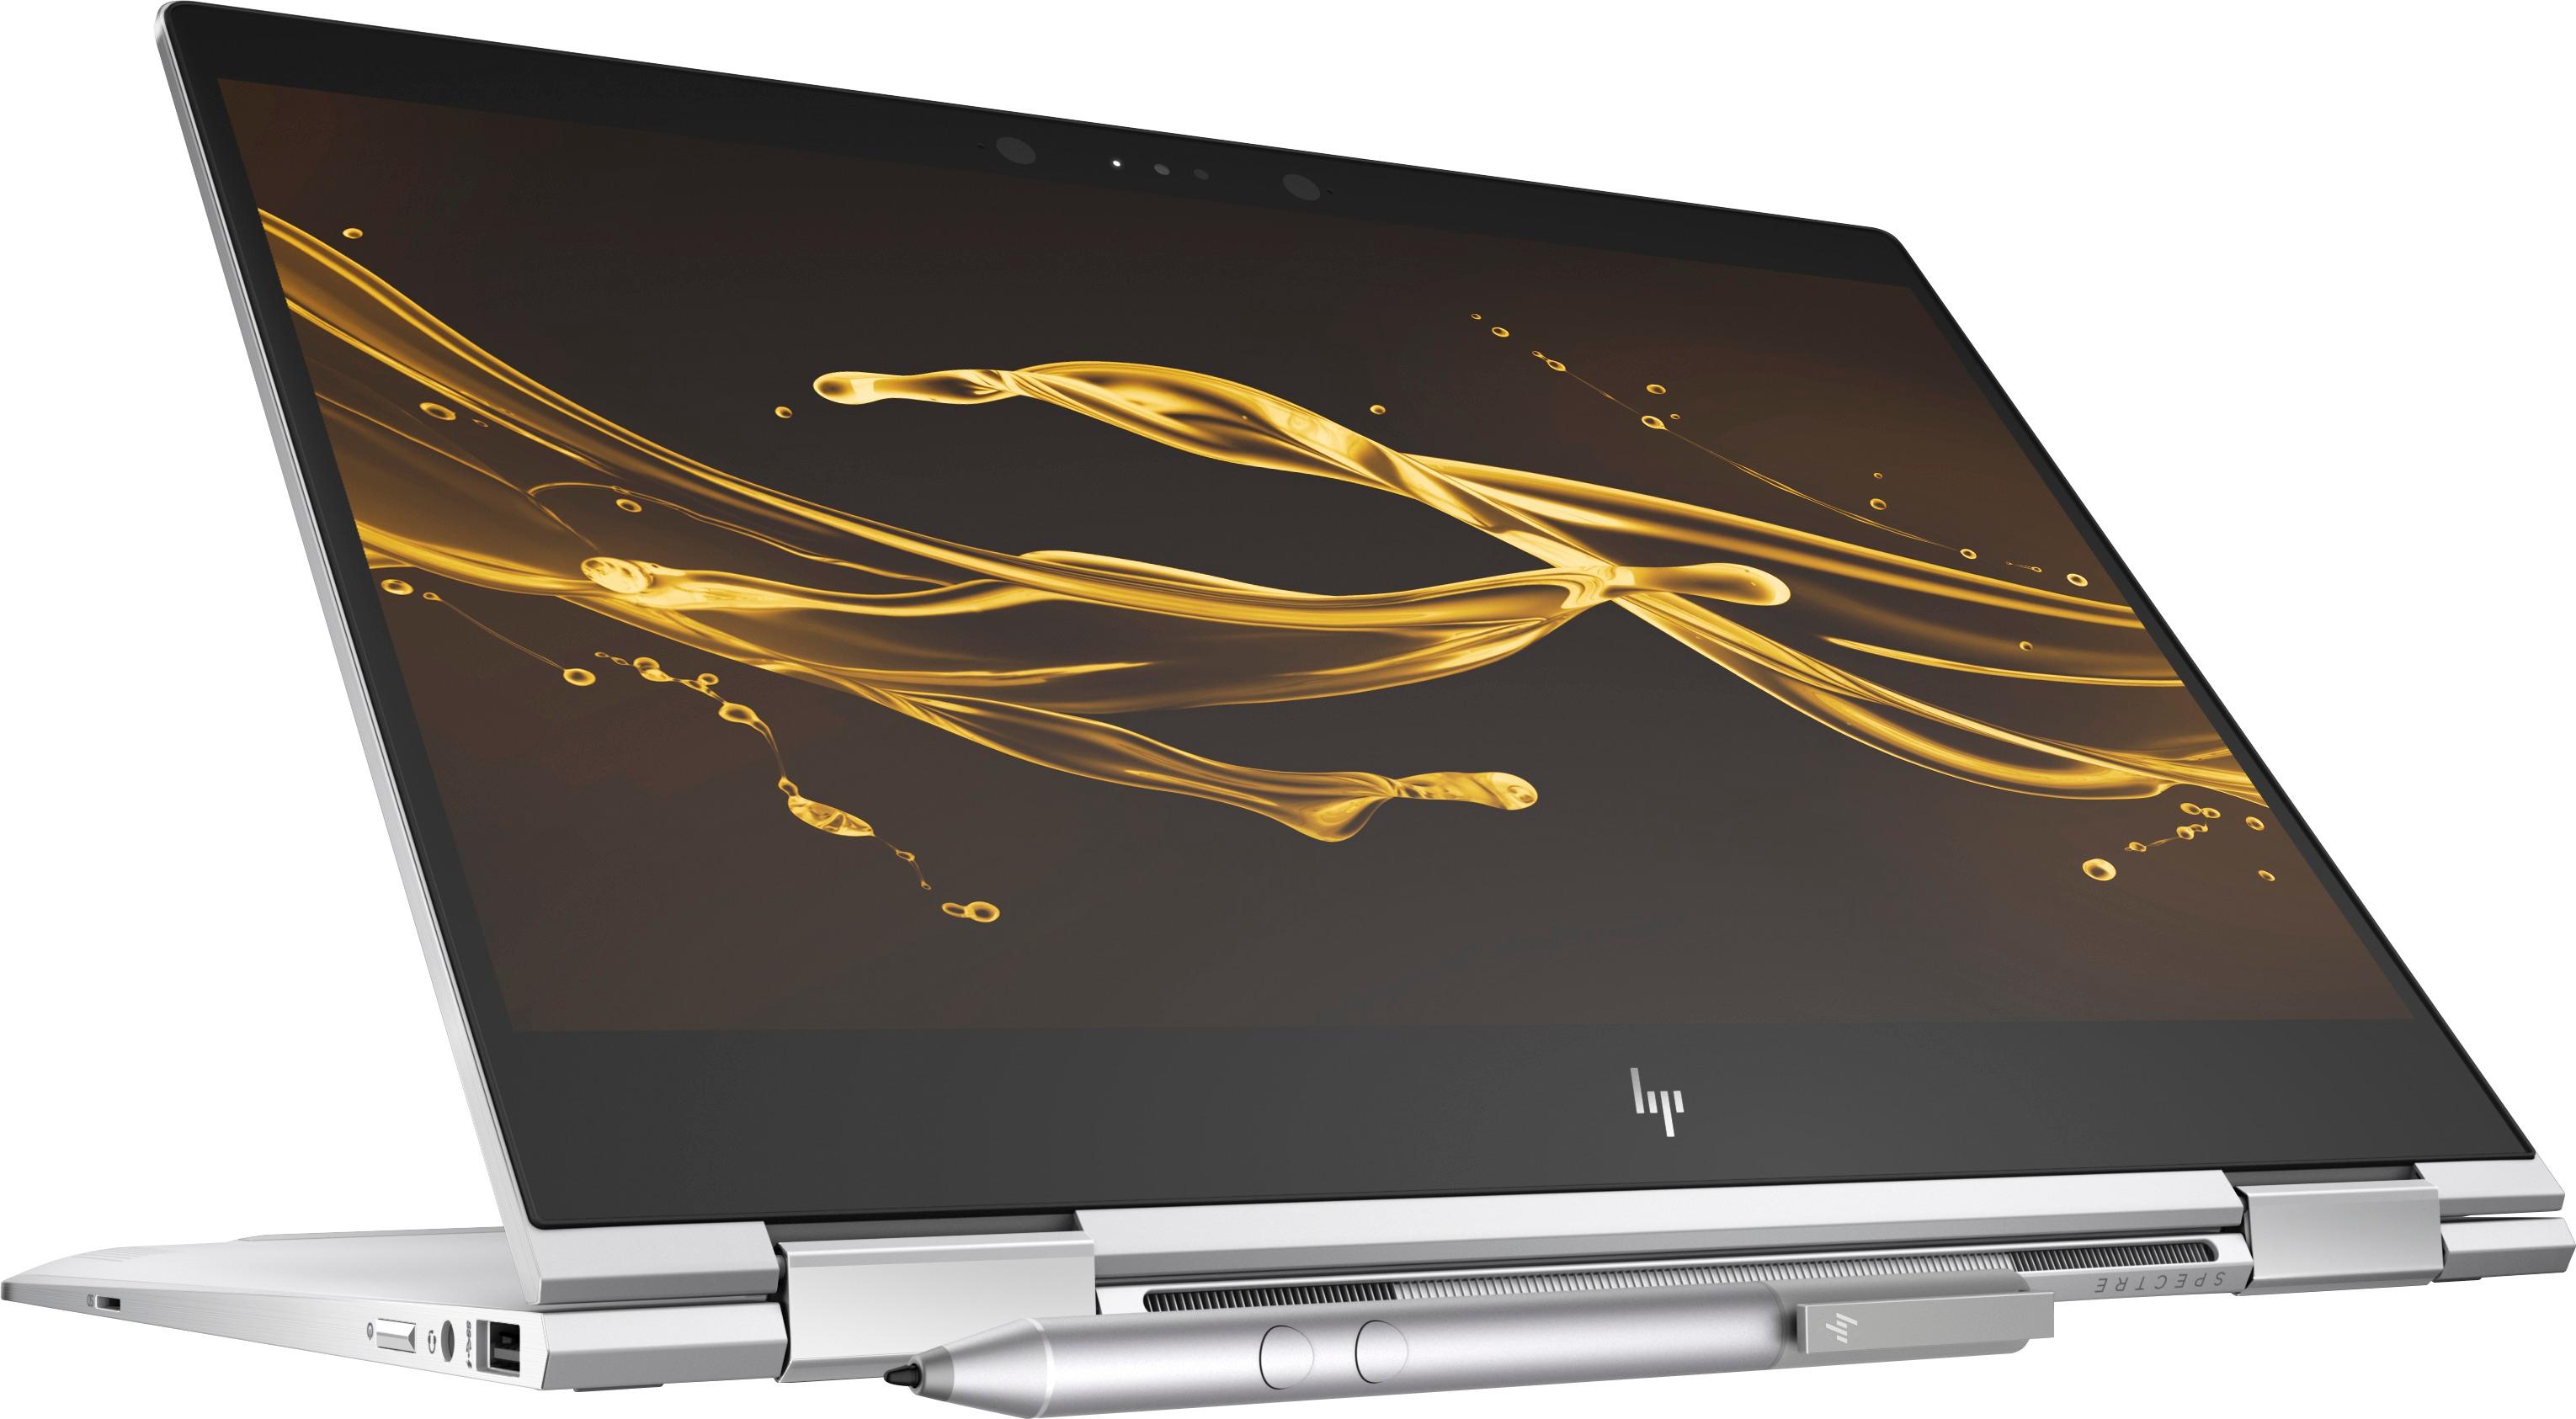 HP Spectre x360 2-in-1 13.3 Laptop Intel Core i7 8GB Memory 512GB SSD +  32GB Optane Natural Silver 13-AW0013DX - Best Buy